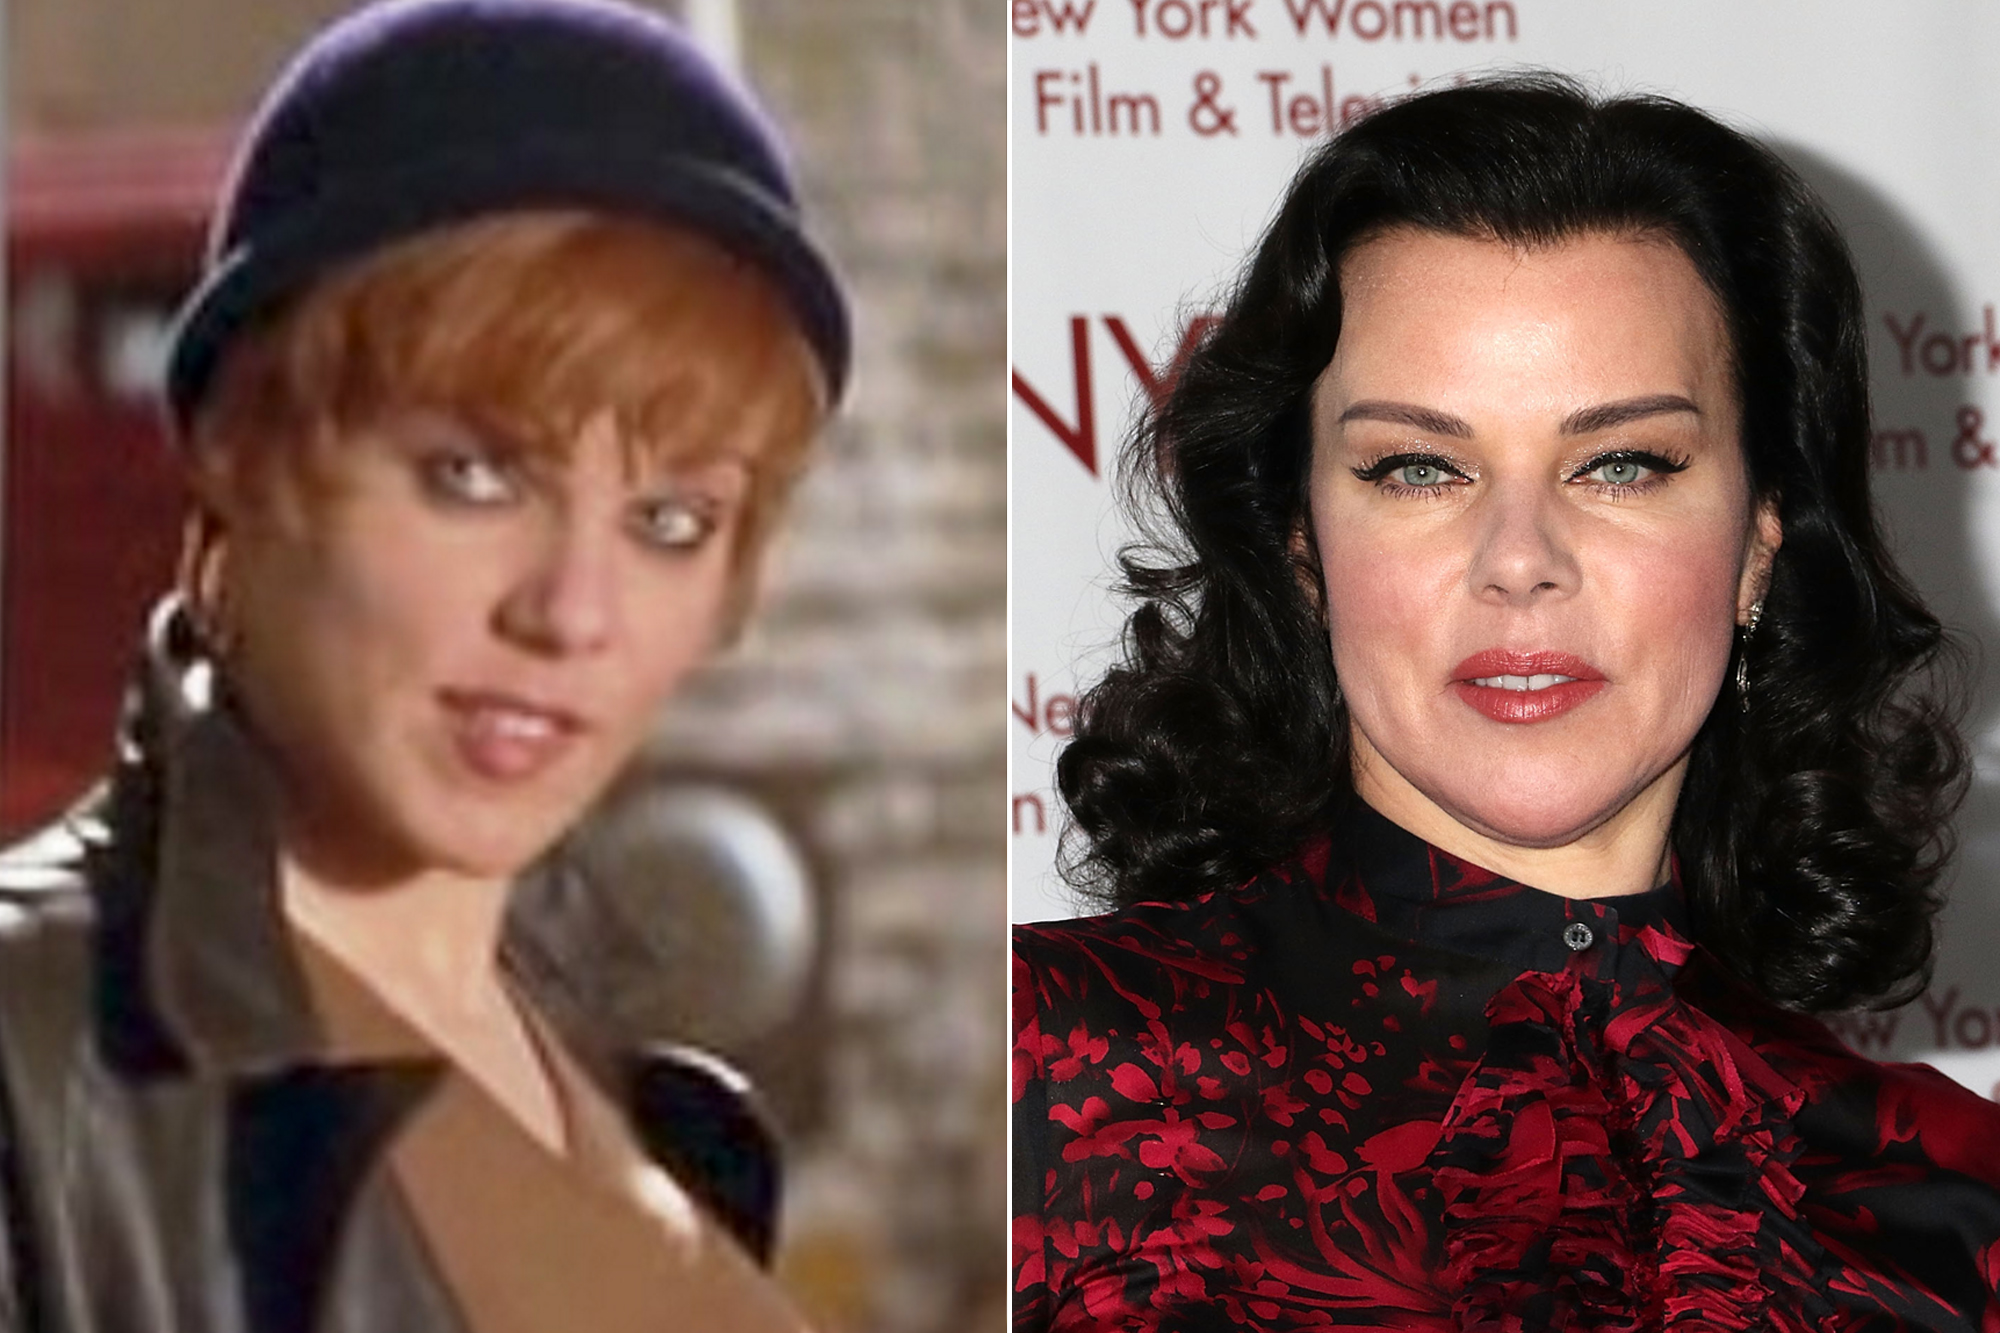 Debi Mazar, who played Jane in 'Empire Records,' has played such memorable roles as Spice in 'Batman Forever' and Shauna, Vinny Chase's long-suffering press agent, on the HBO series 'Entourage.'